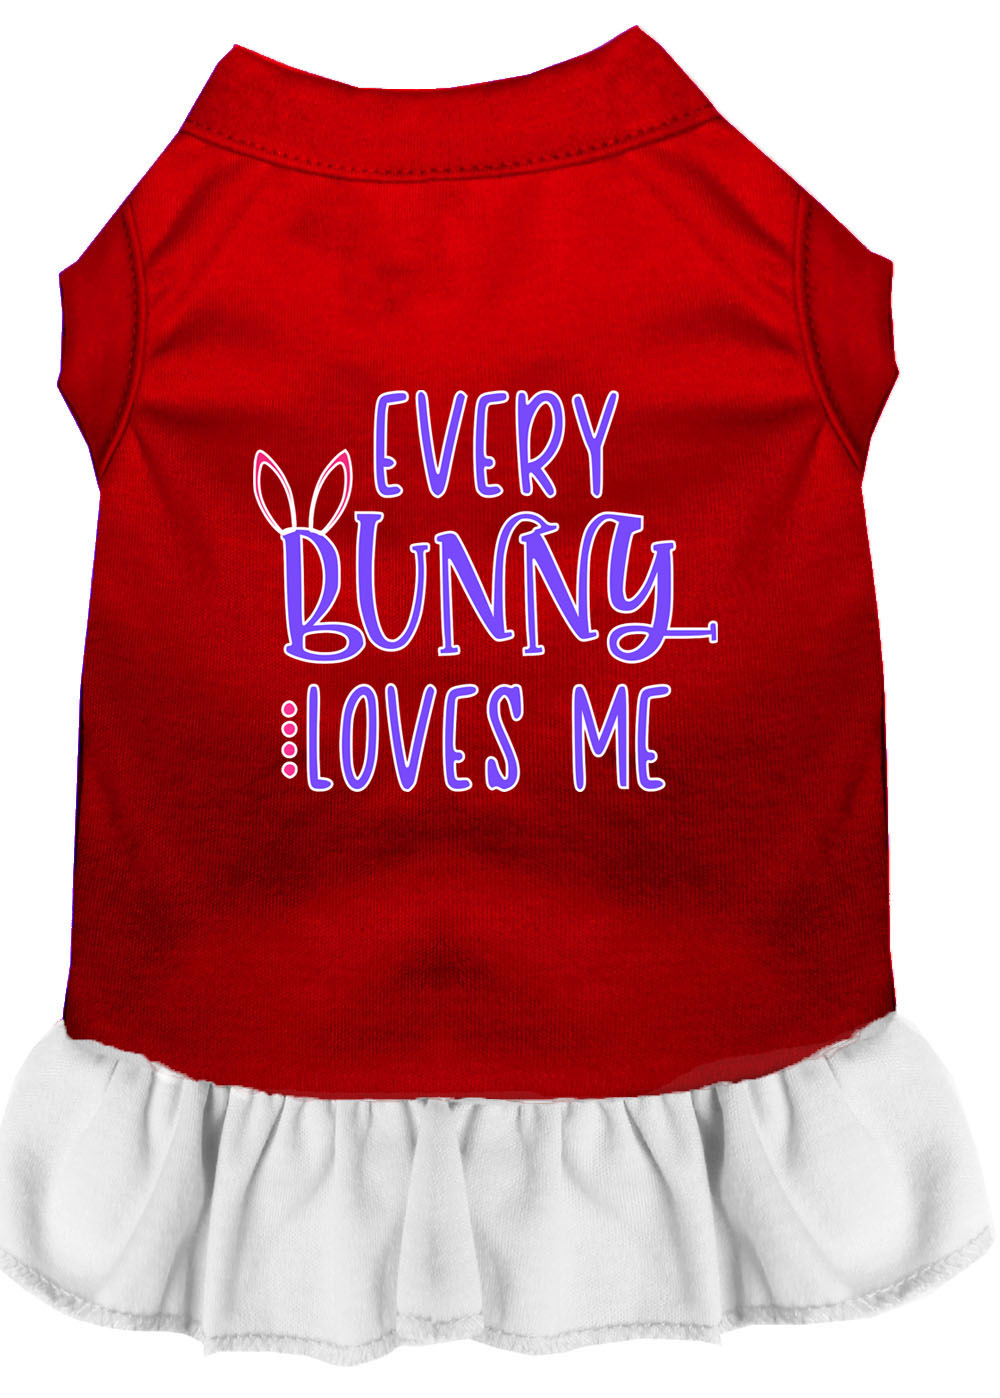 Every Bunny Loves me Screen Print Dog Dress Red with White XL